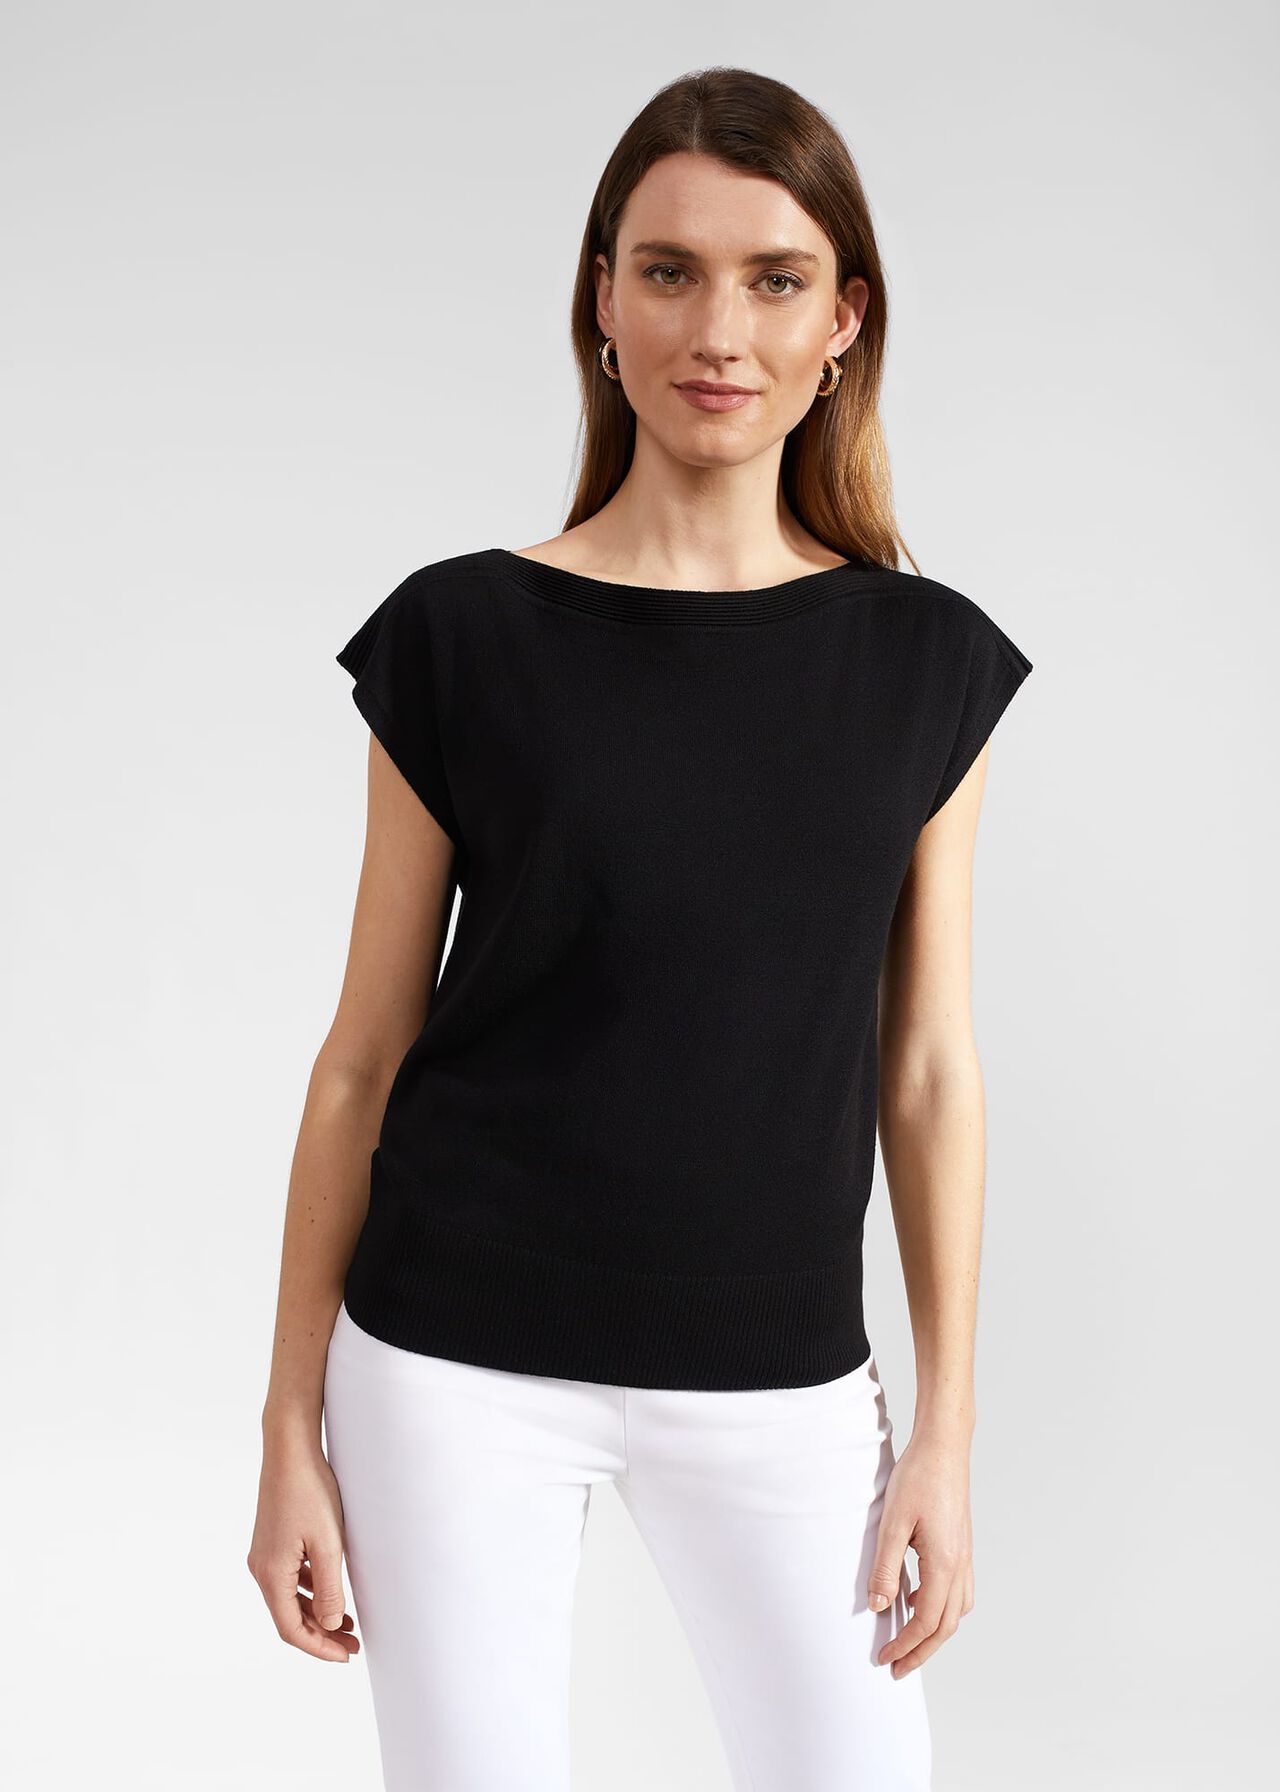 Leona Knitted Top With Wool, Black, hi-res